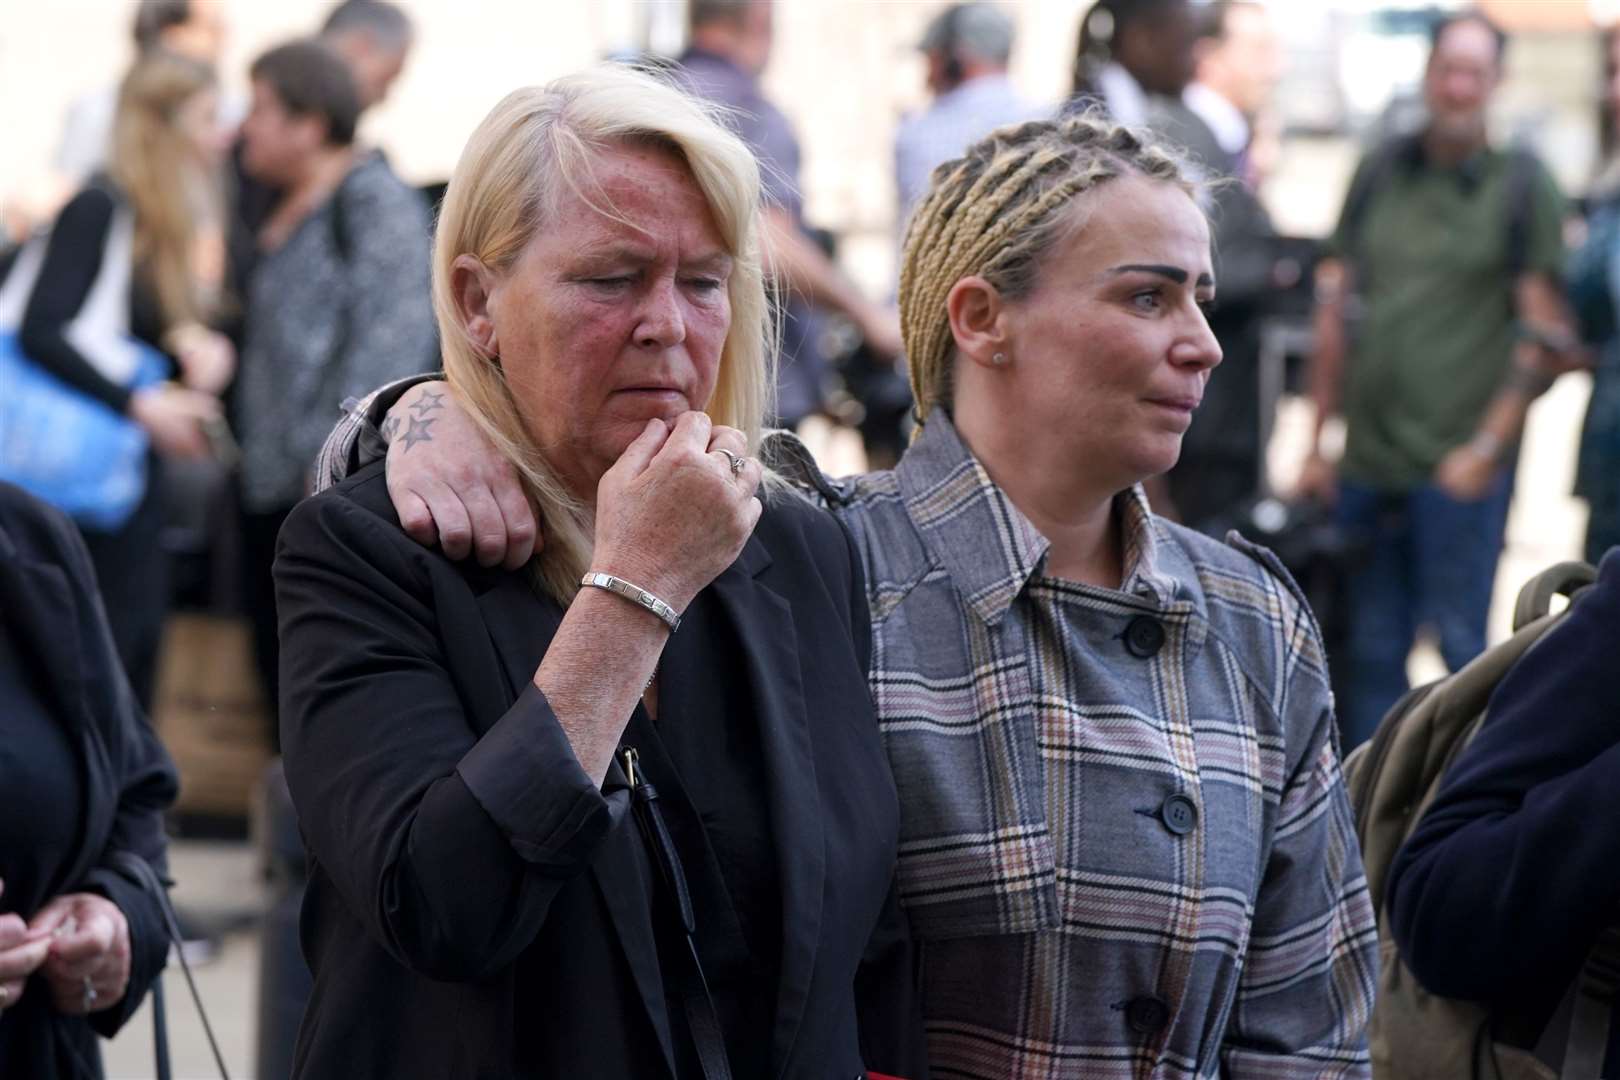 Nikki Allan’s mother Sharon Henderson (left) and Nikki’s sister Stacey speak to the media following the sentencing (Owen Humphreys/PA)